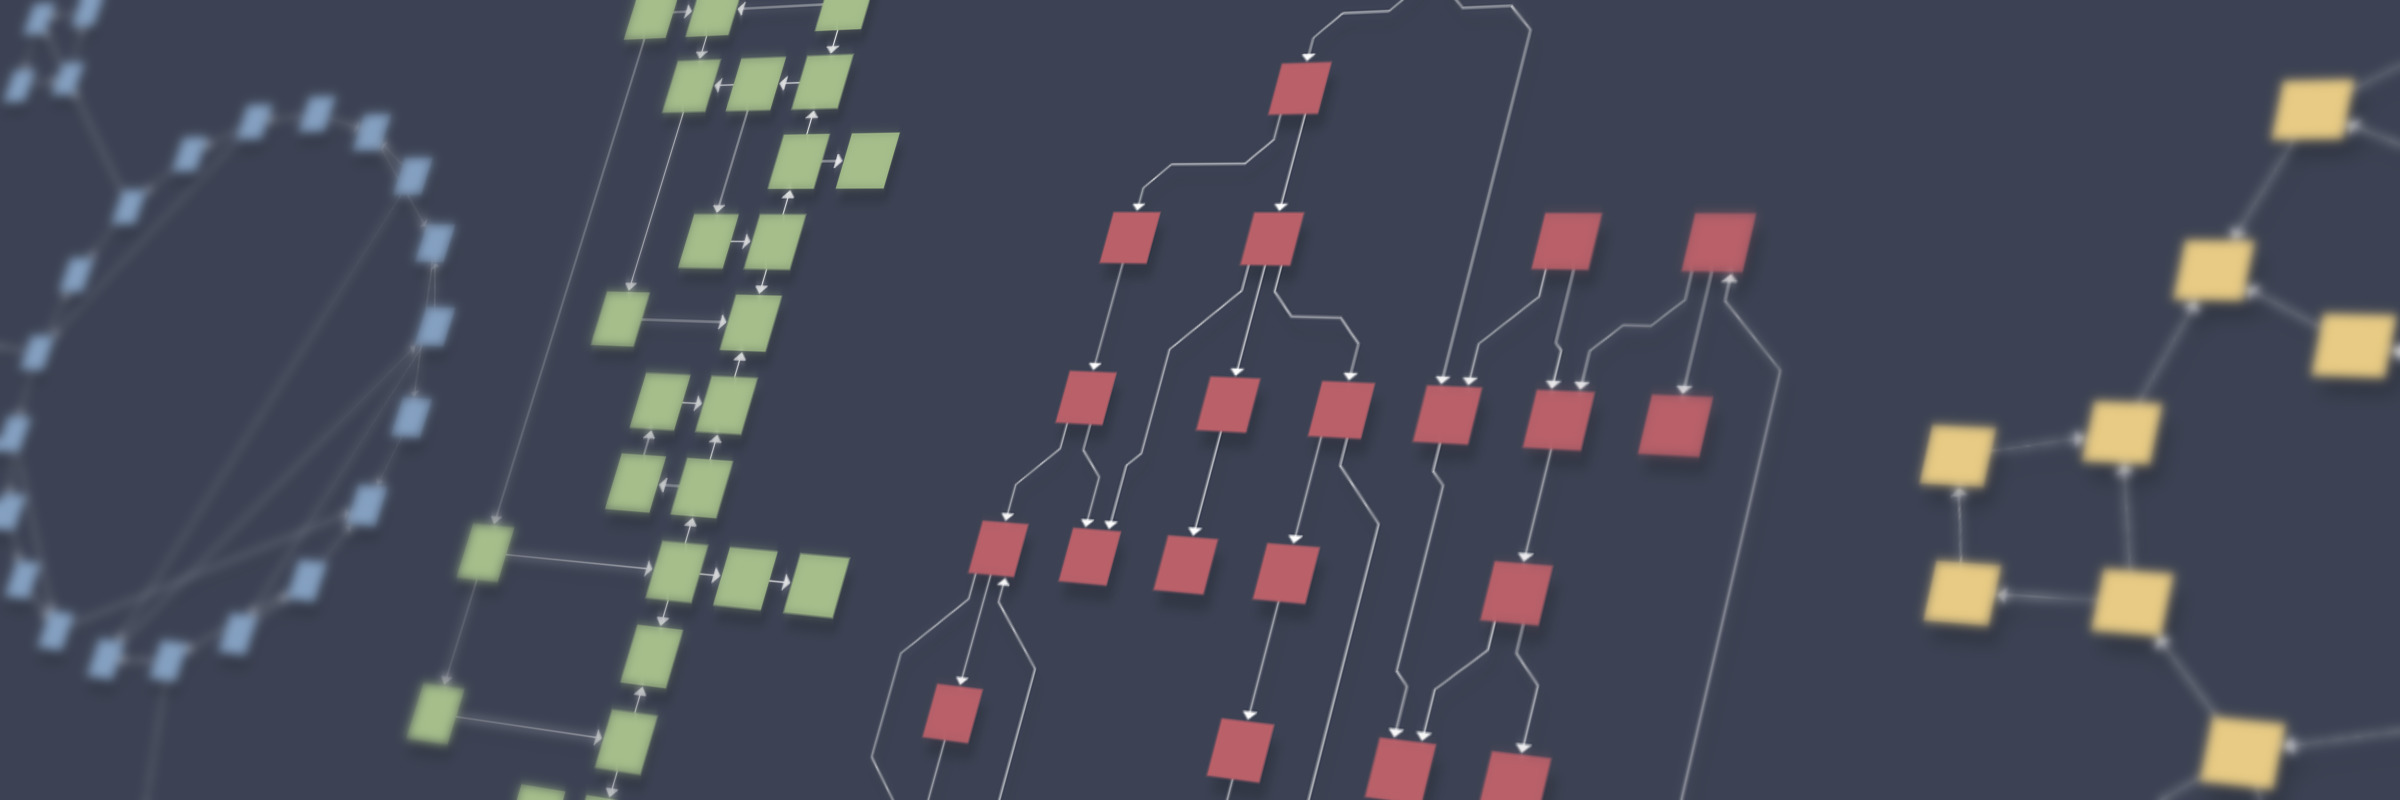 Hero image for Interactive Showcase of Graph Layouts